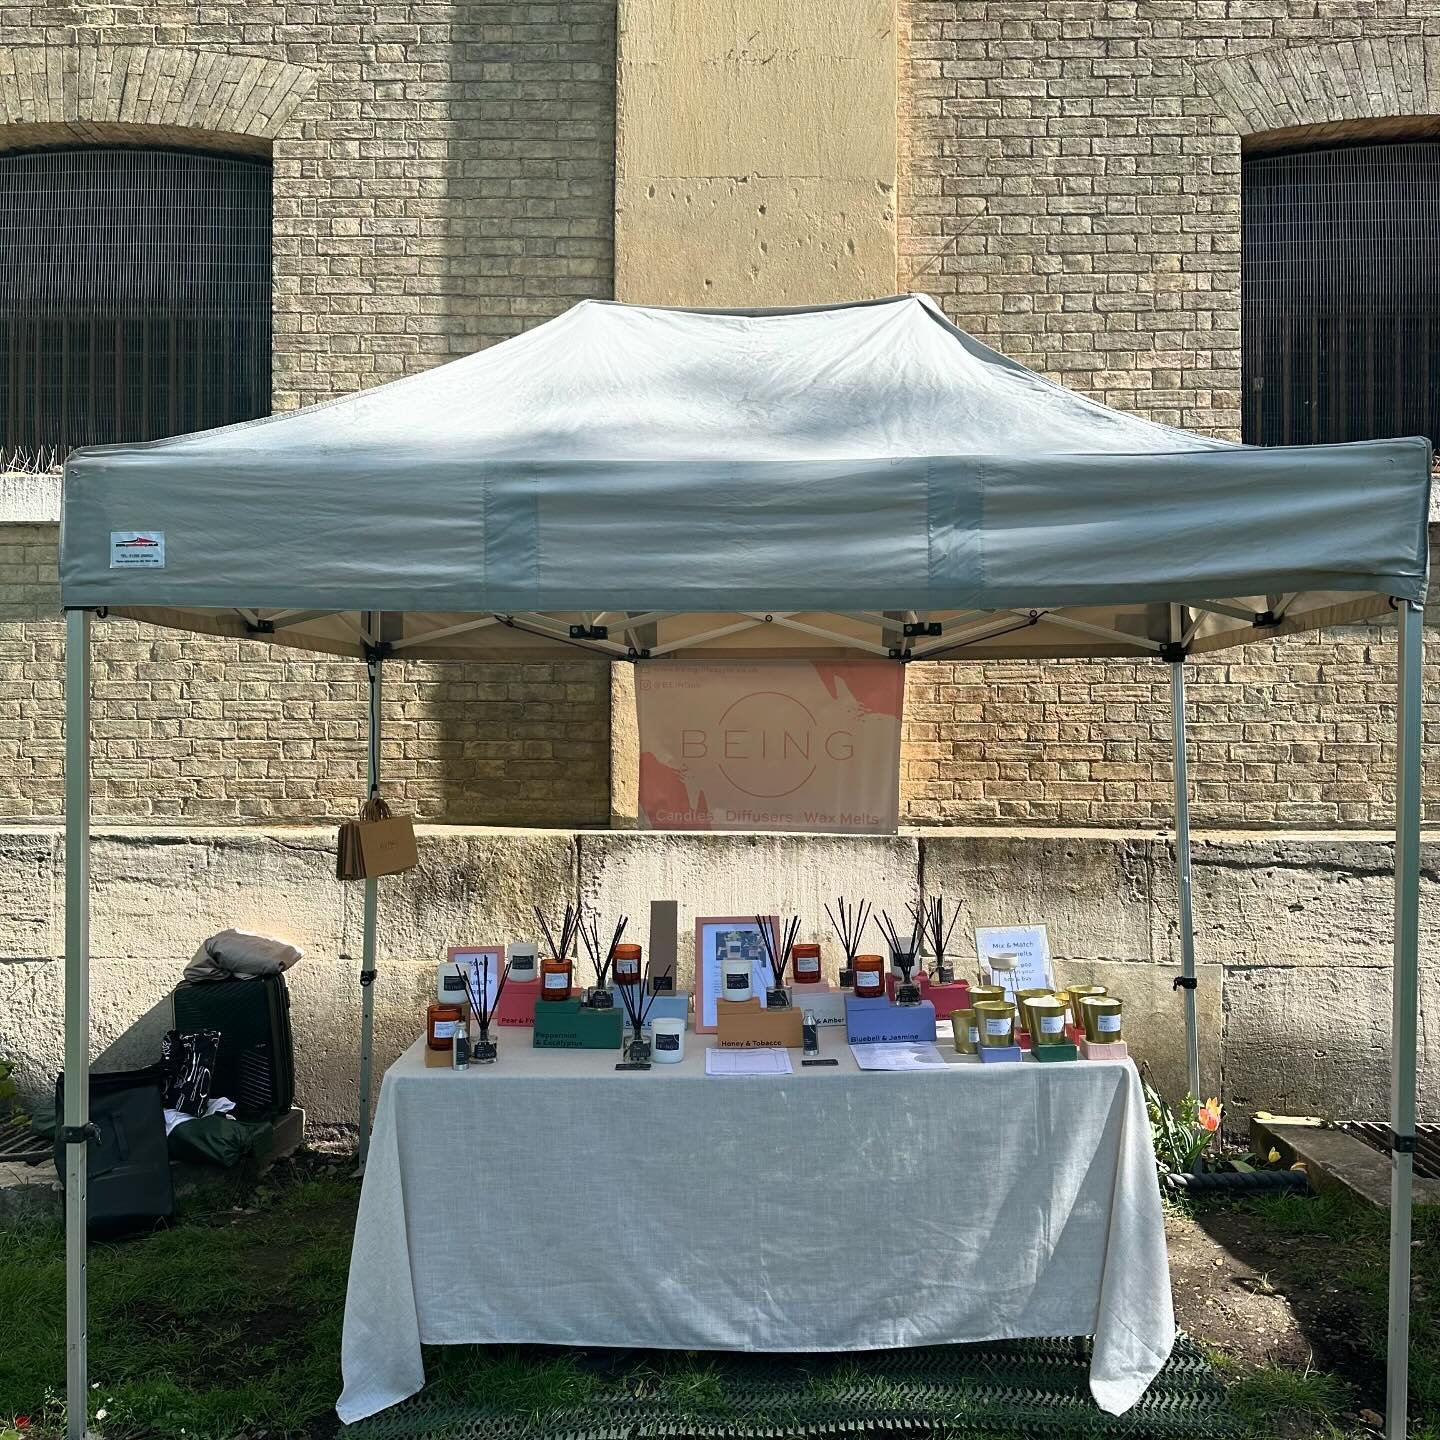 OVAL WE HAVE ARRIVED 🫶🏼

Find us here 10-3pm with @ovalfarmersmarket 

-  #oval #ovalfarmersmarket #brixtonvillage #kennington #ovallondon #farmersmarkets #londonfarmersmarket #saturdayvibes✨ #candlesandcandles #candlesofinsta #handpouredcandle